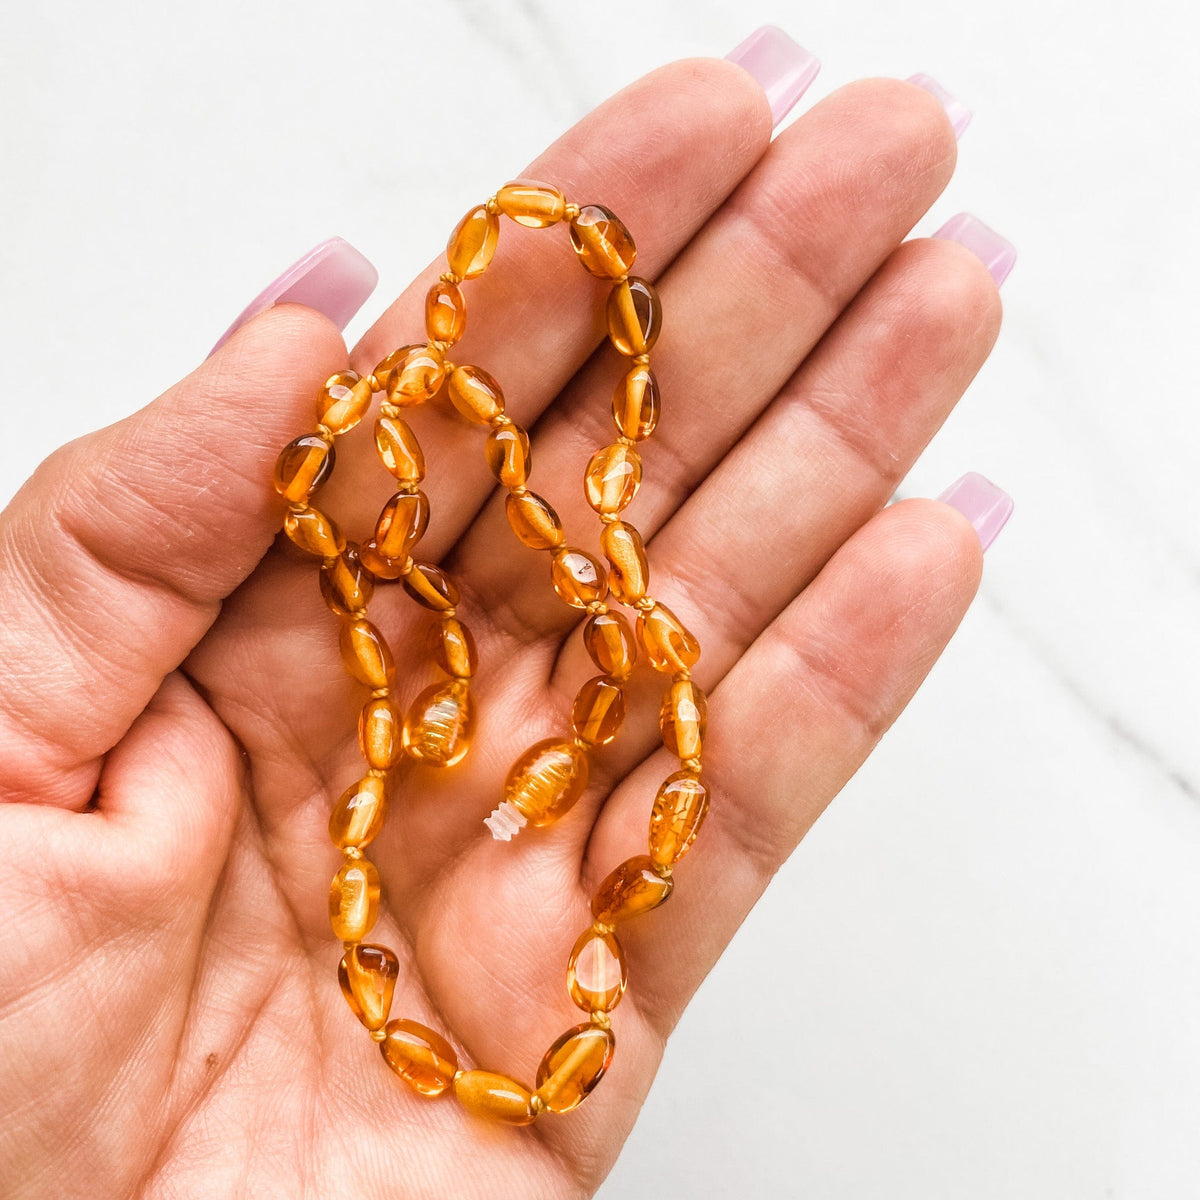 Best Amber Bead Necklace for Teething - Baltic Essentials